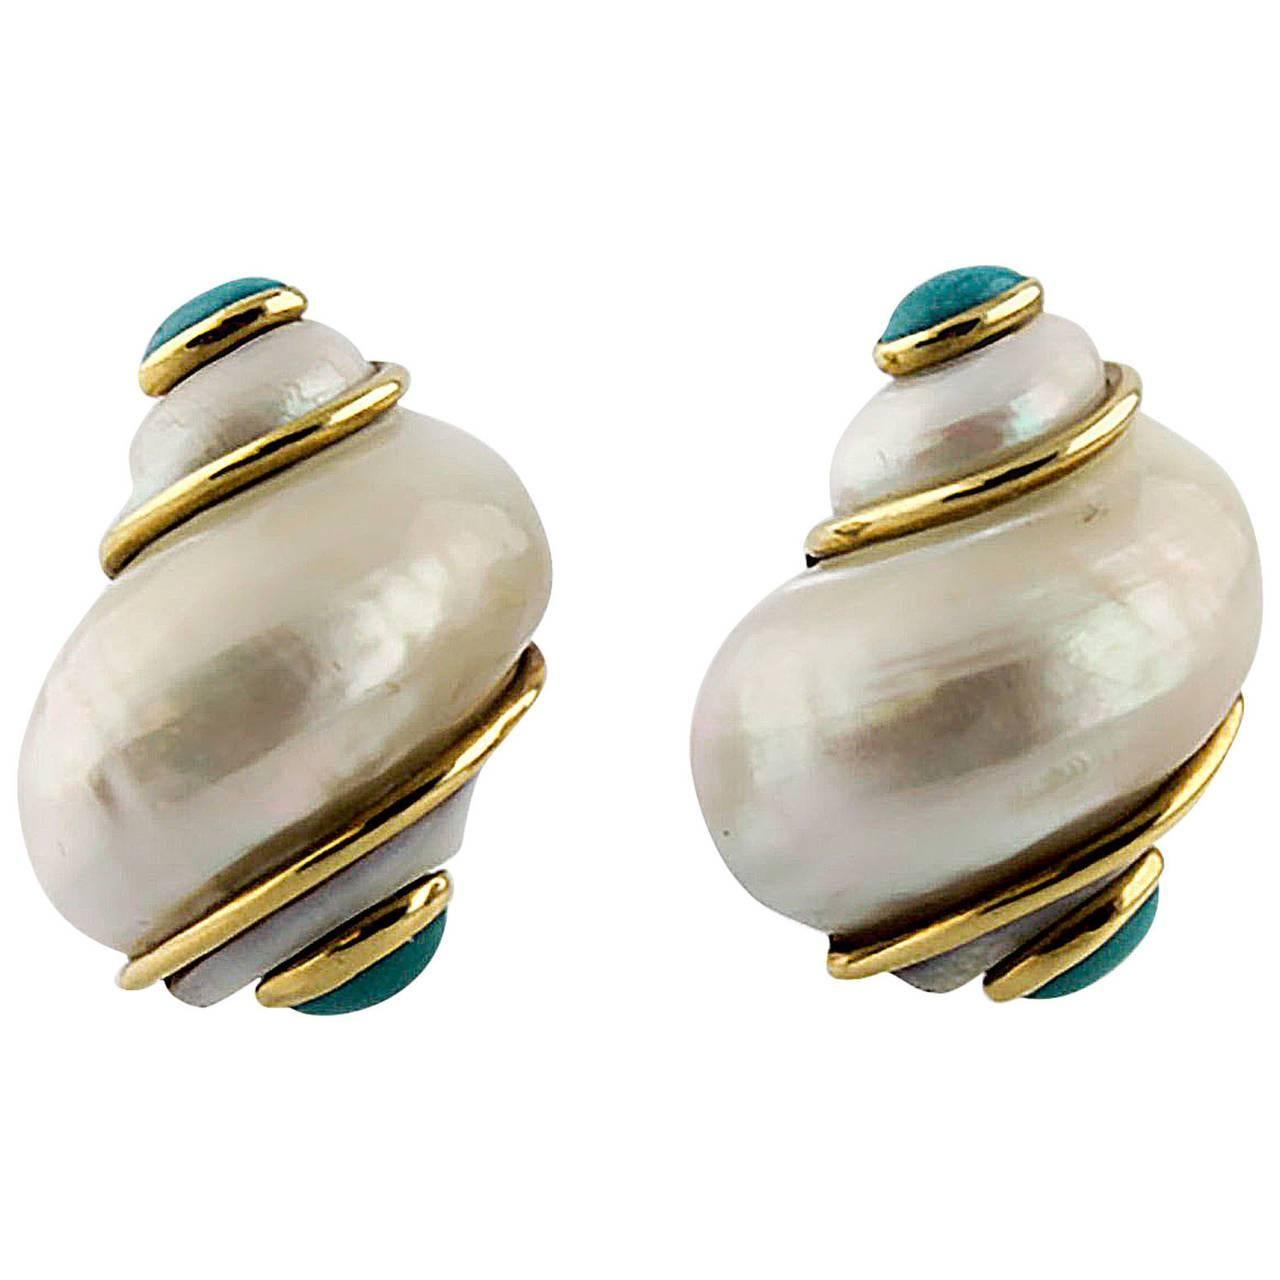 Seaman Schepps Turbo Collection Turquoise Gold Sea Shell Earrings